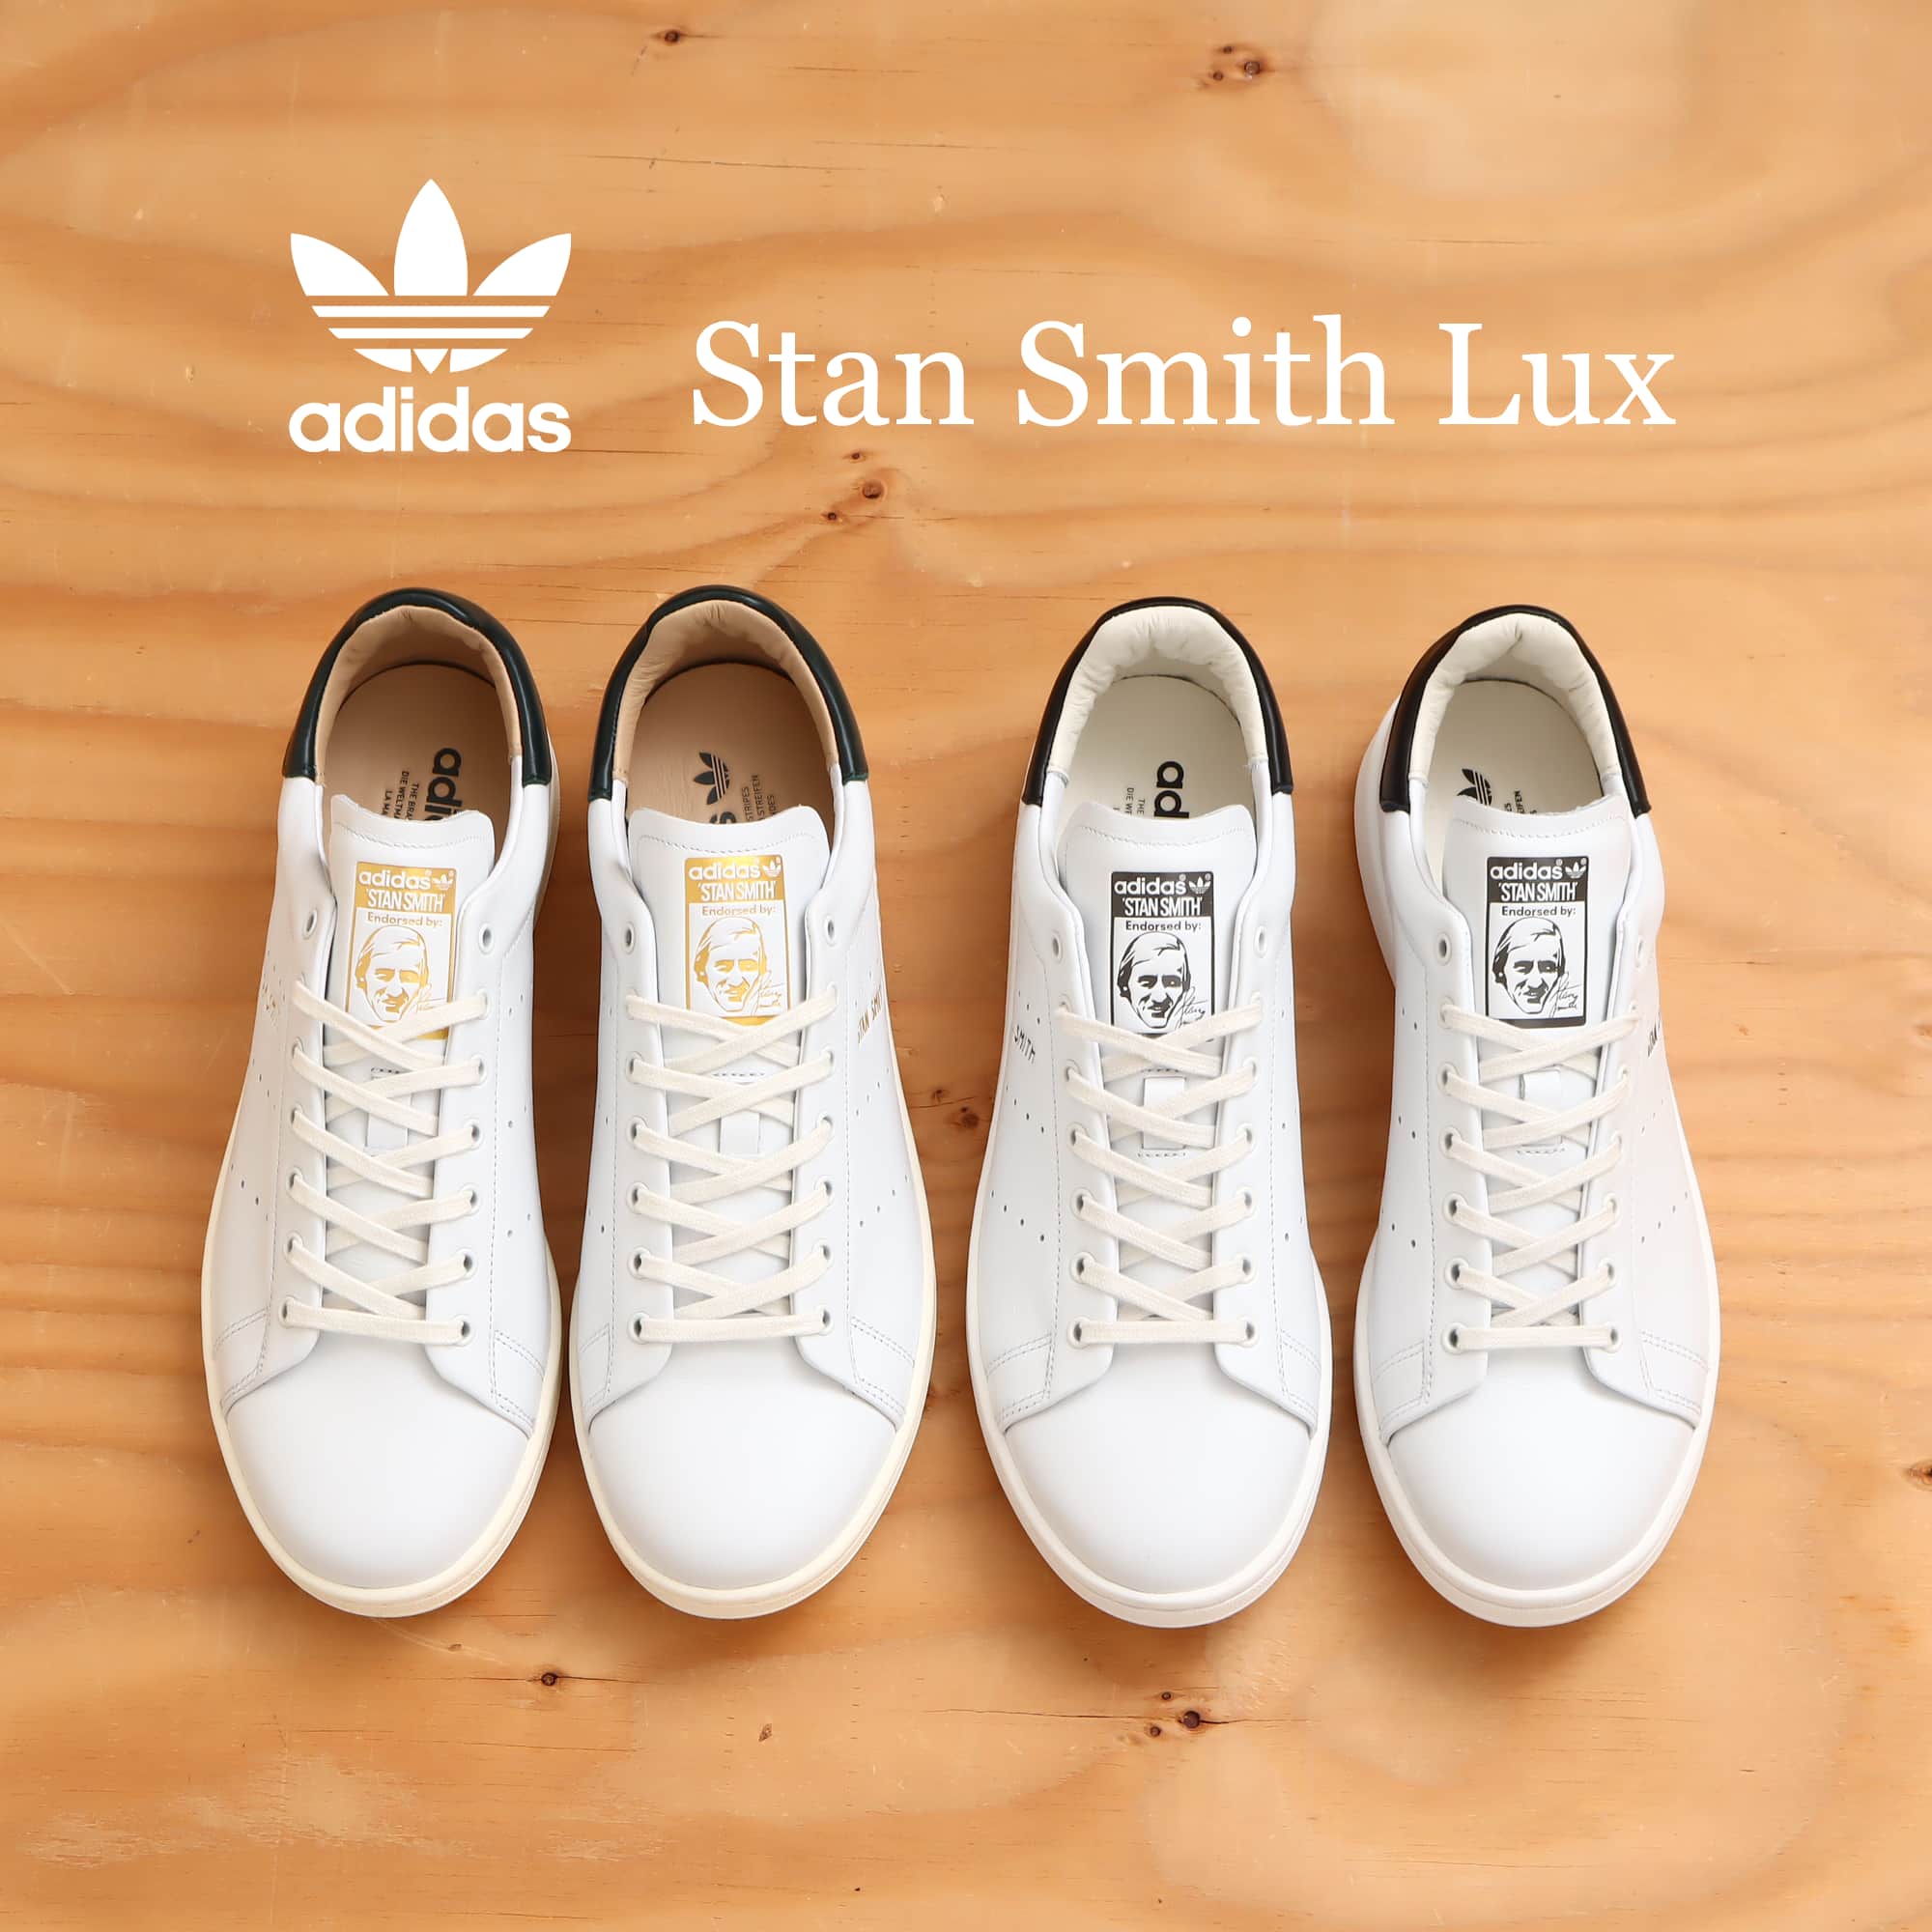 adidas スタンスミス　LUX / STAN SMITH LUX